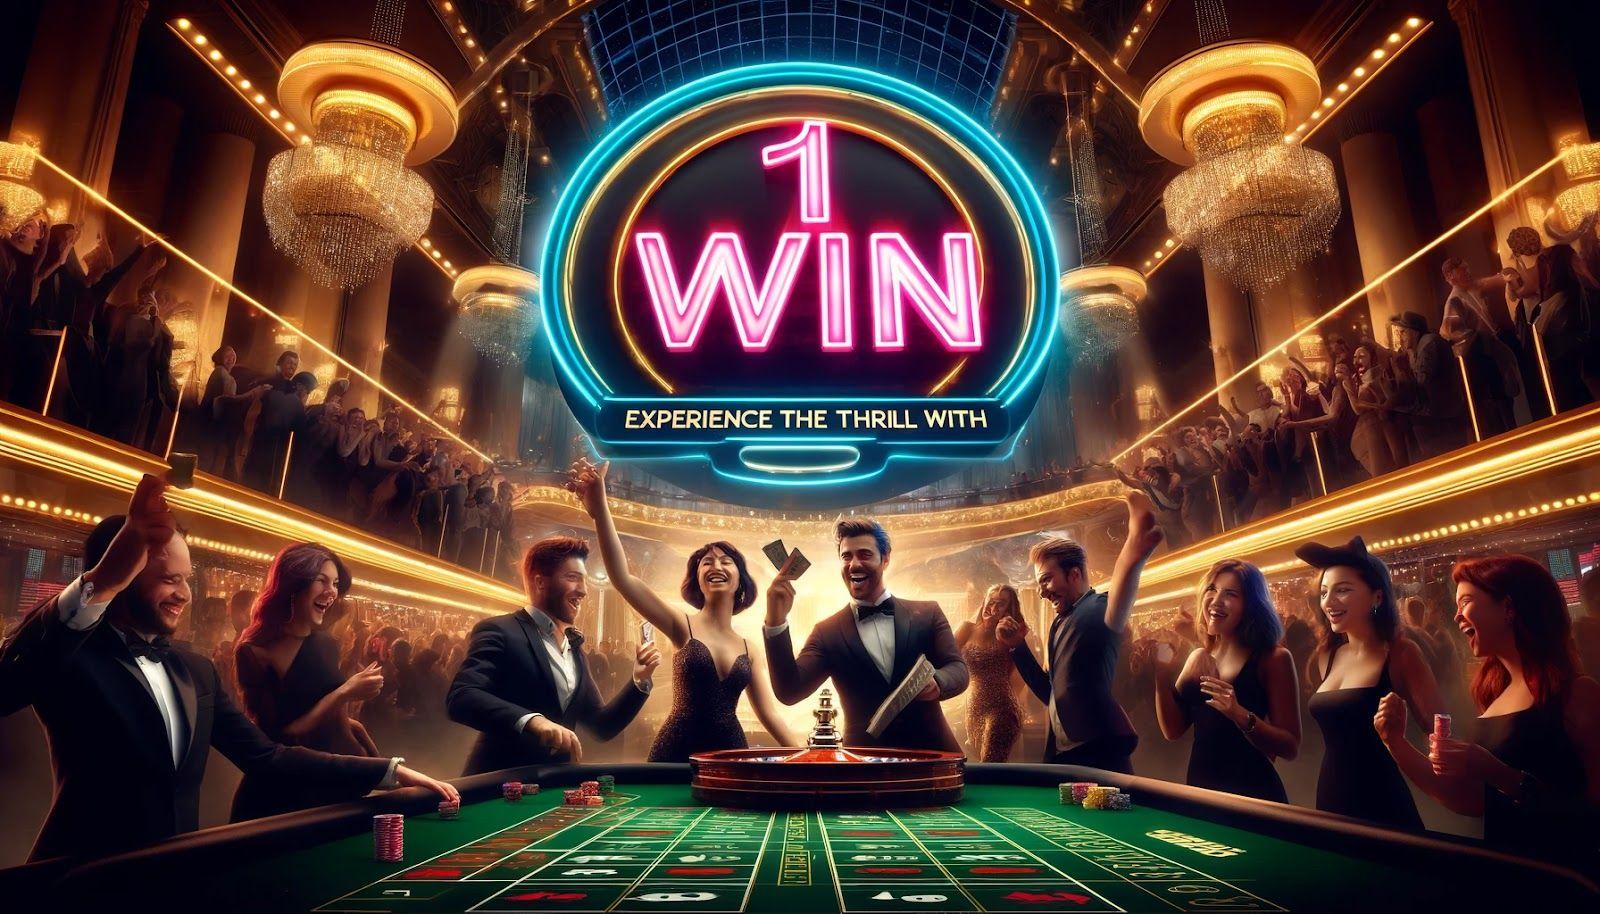 1Win the winning application among online gamblers in the Dominican Republic